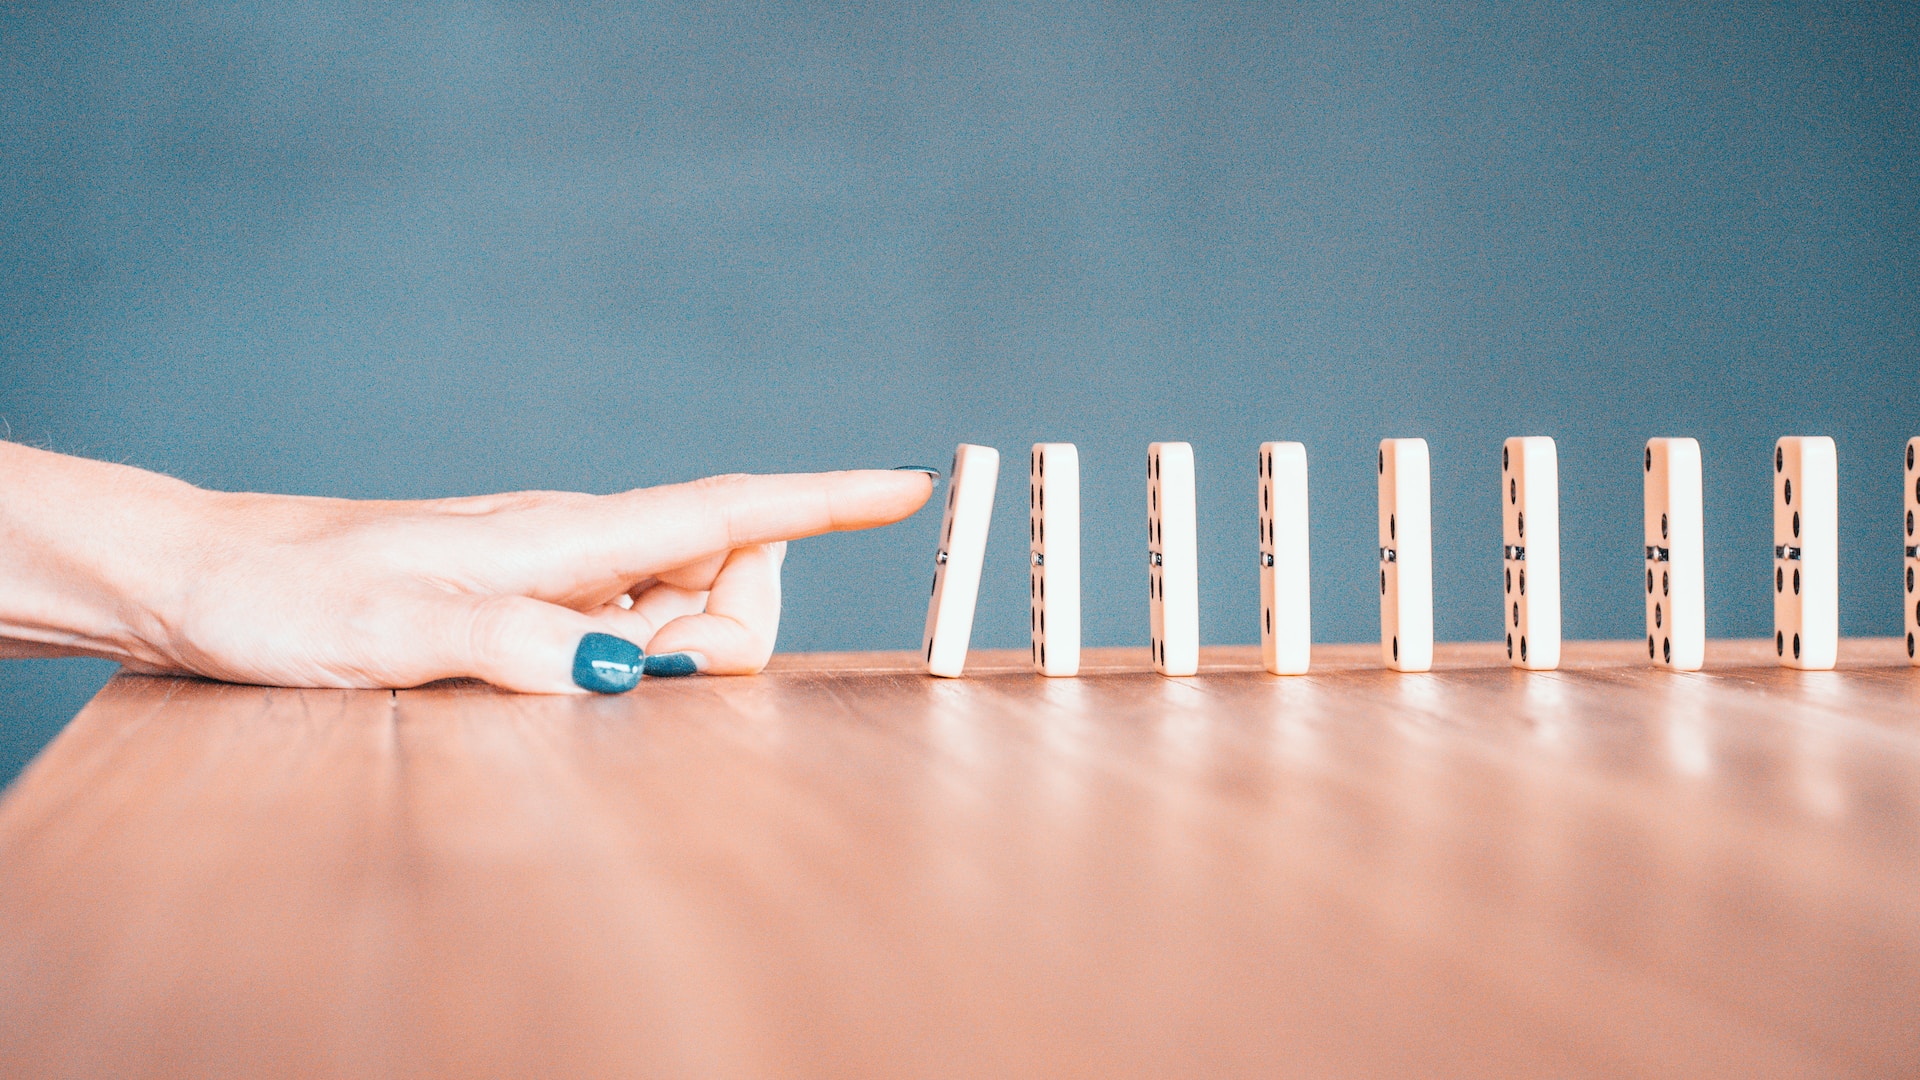 description: Hand, with finger extended, tipping over the first in a line of dominoes. Photo by Bradyn Trollip on Unsplash